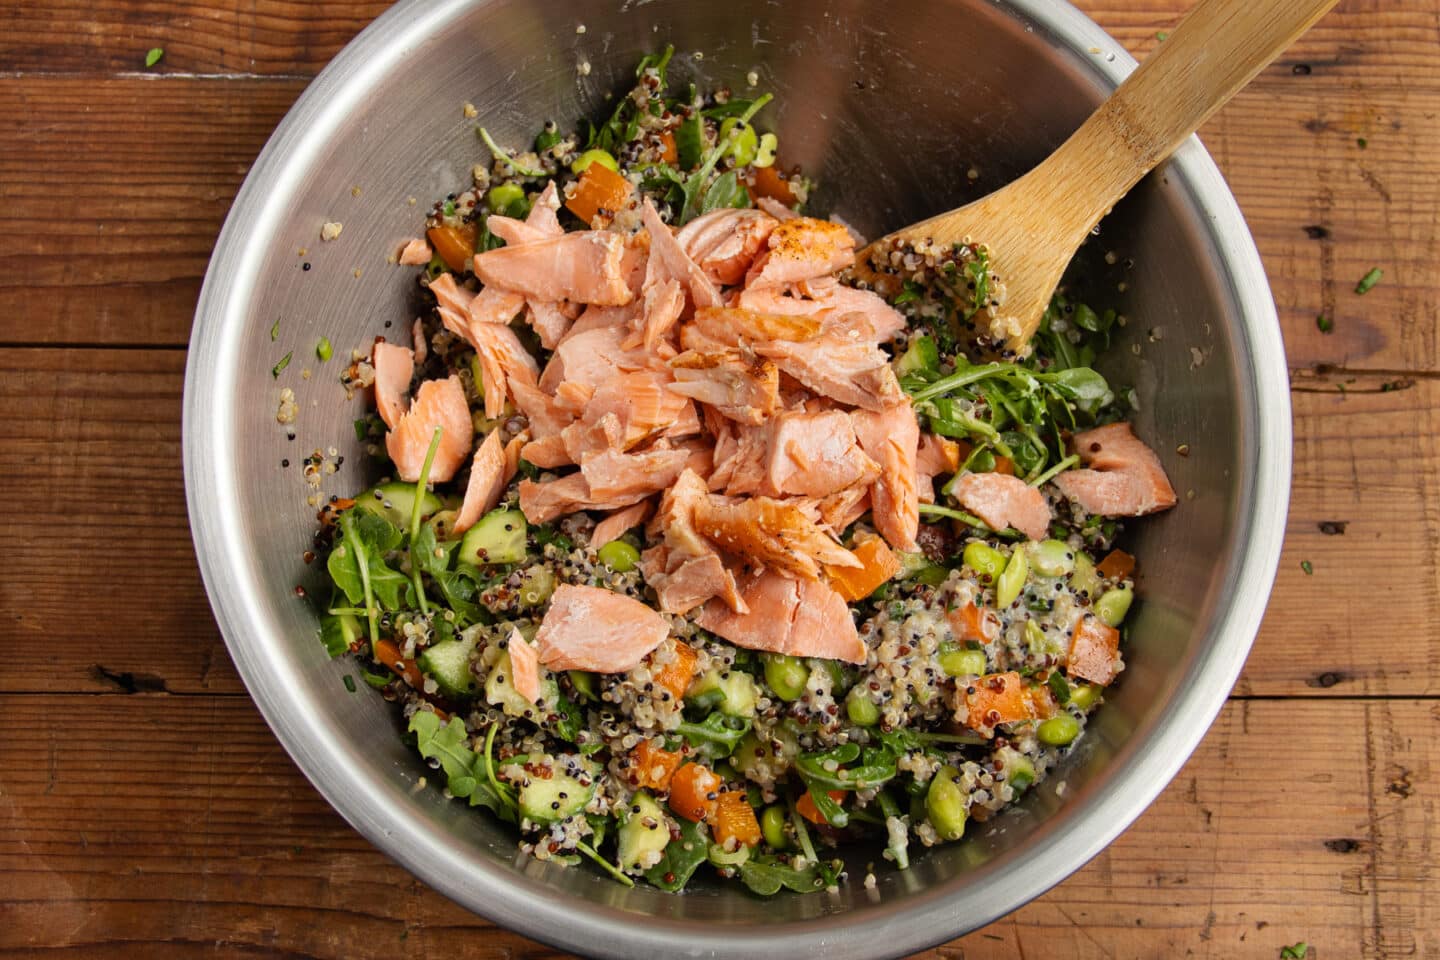 This is the quinoa salad being tossed in a bowl with the salmon and dressing.